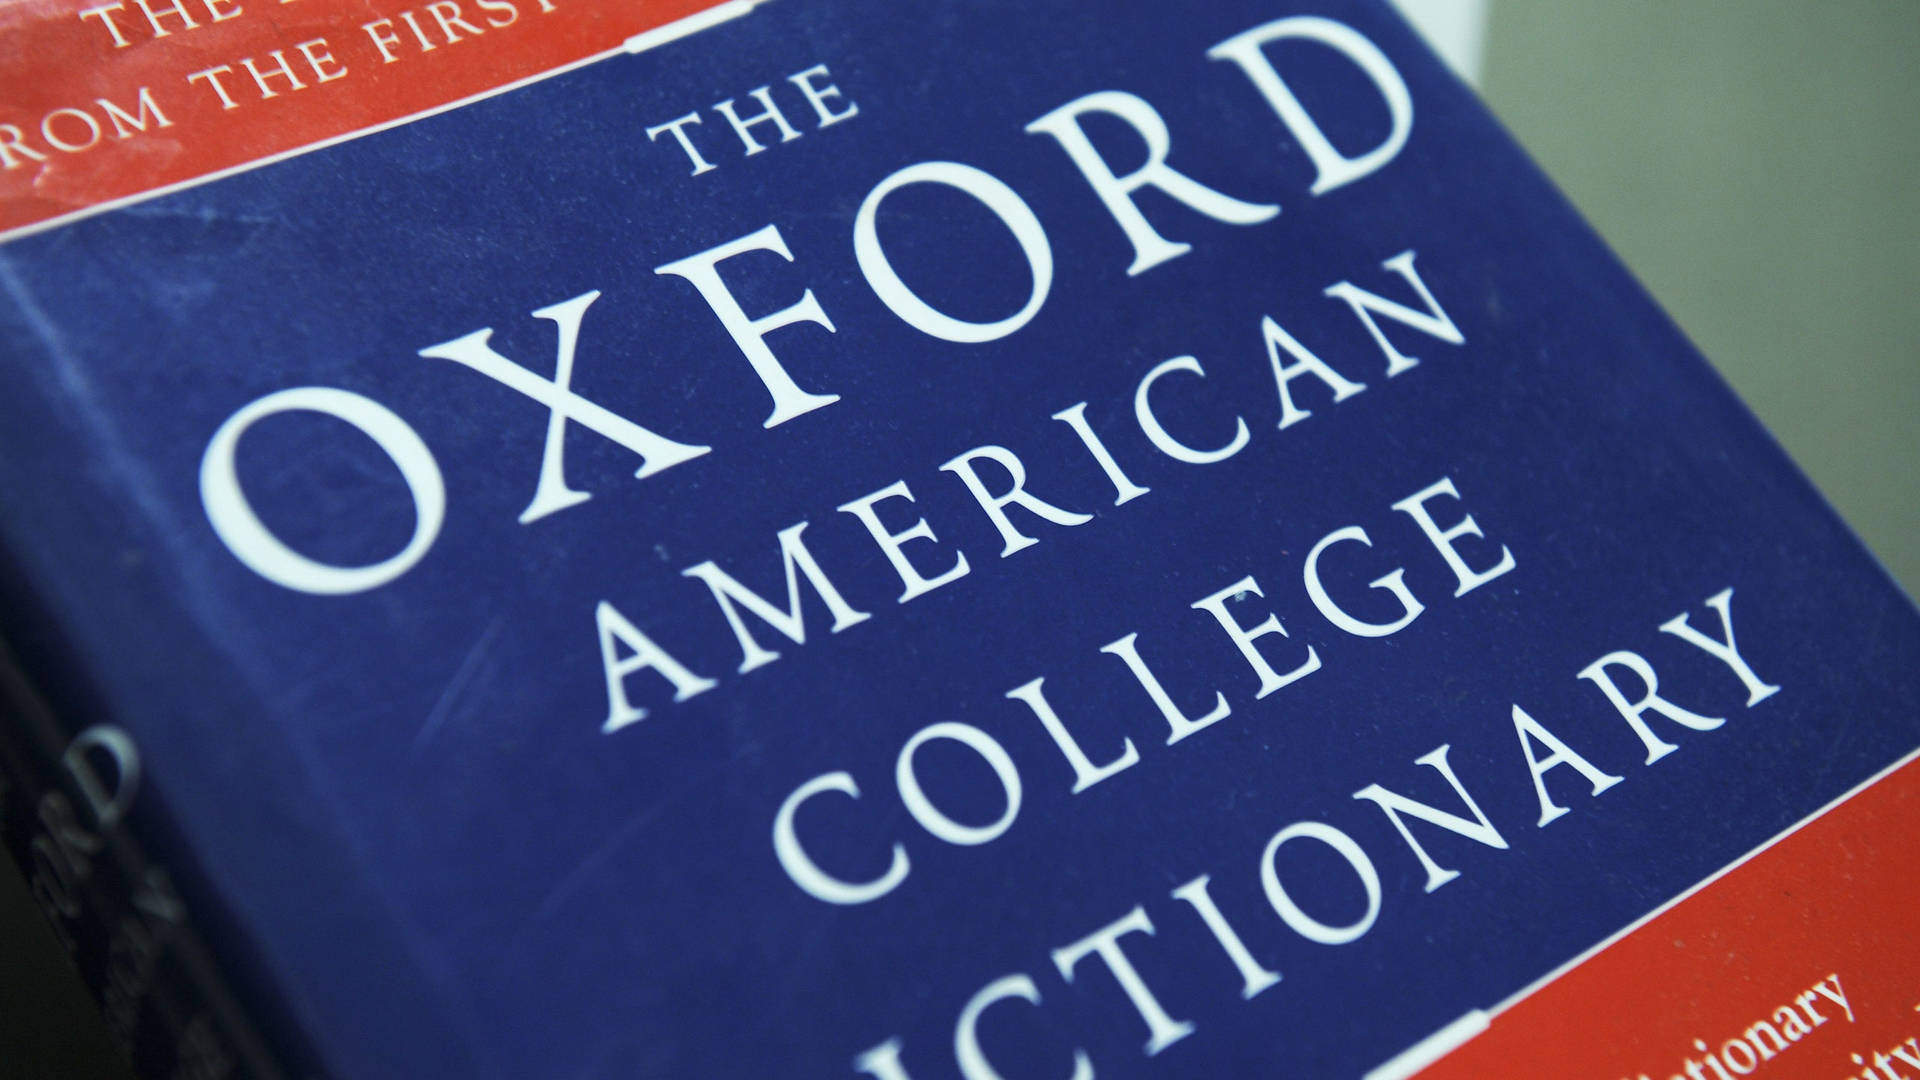 Oxford American College Dictionary Background